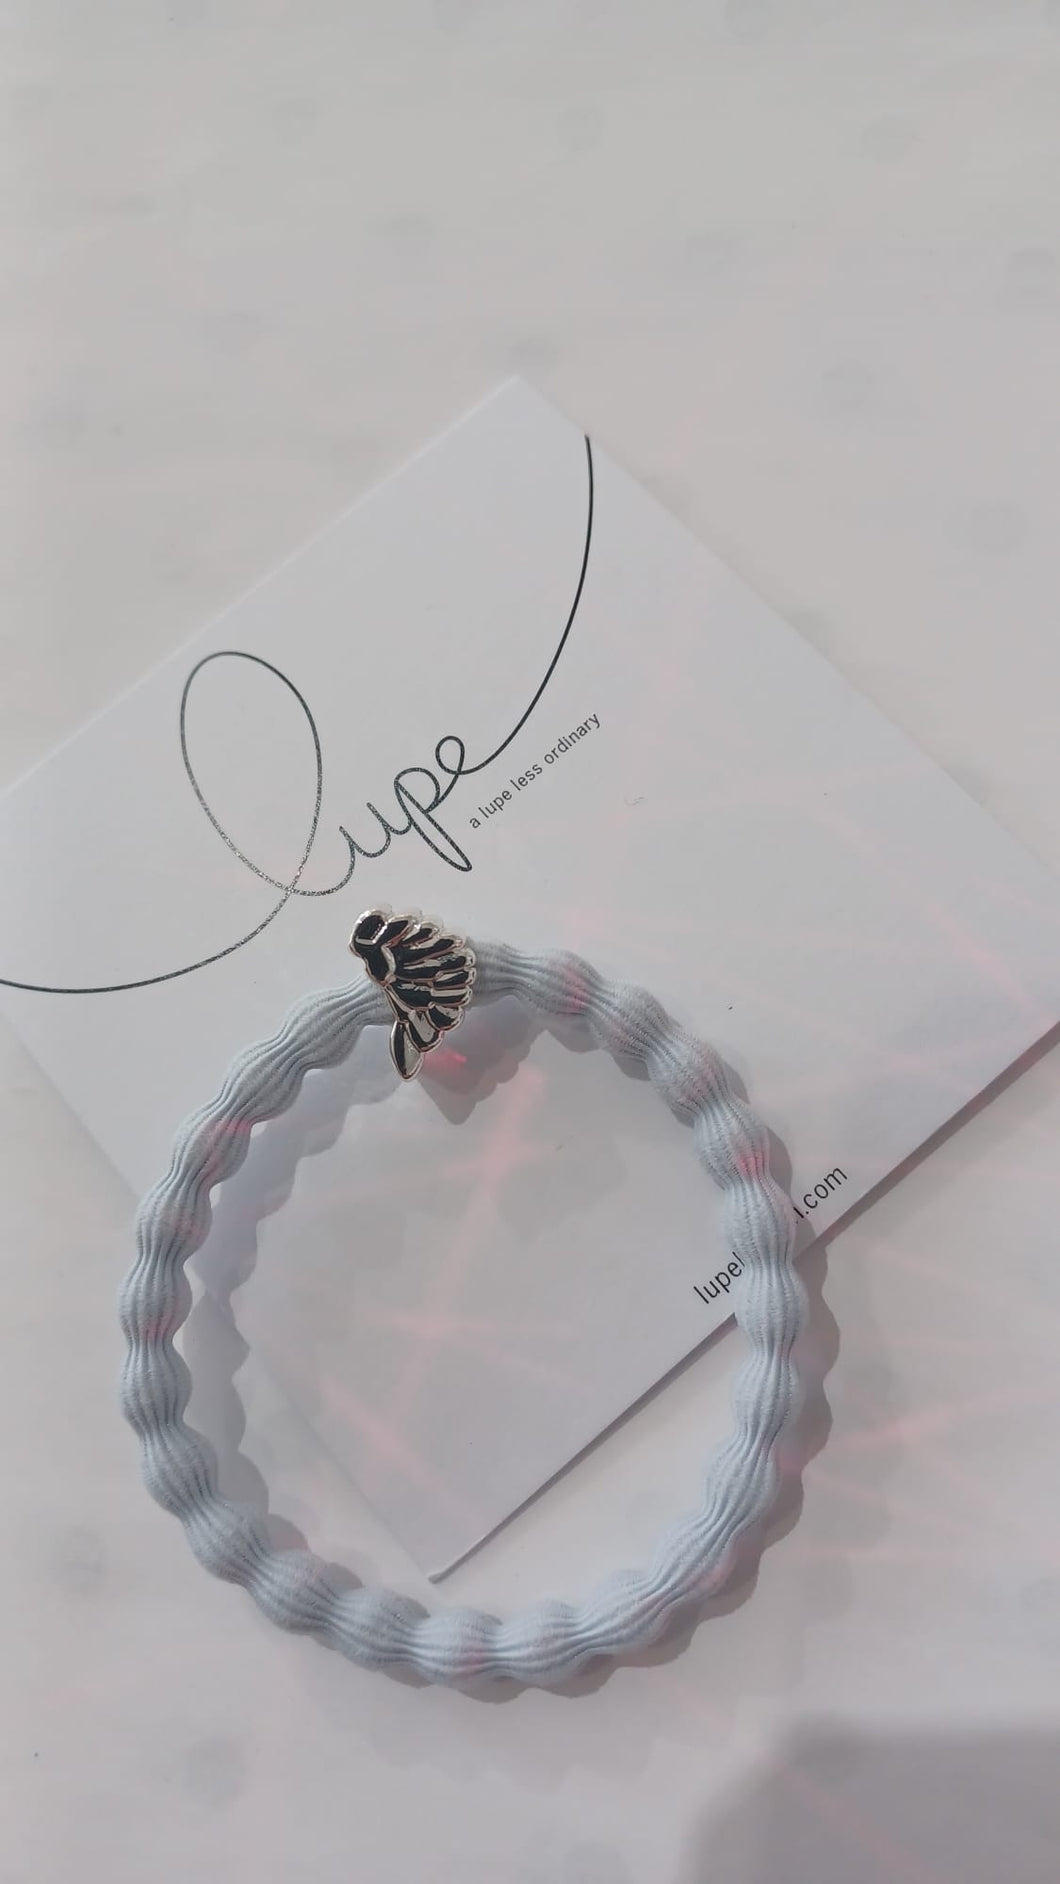 Lupe Hair Tie and Bracelet Silver Angel Wing